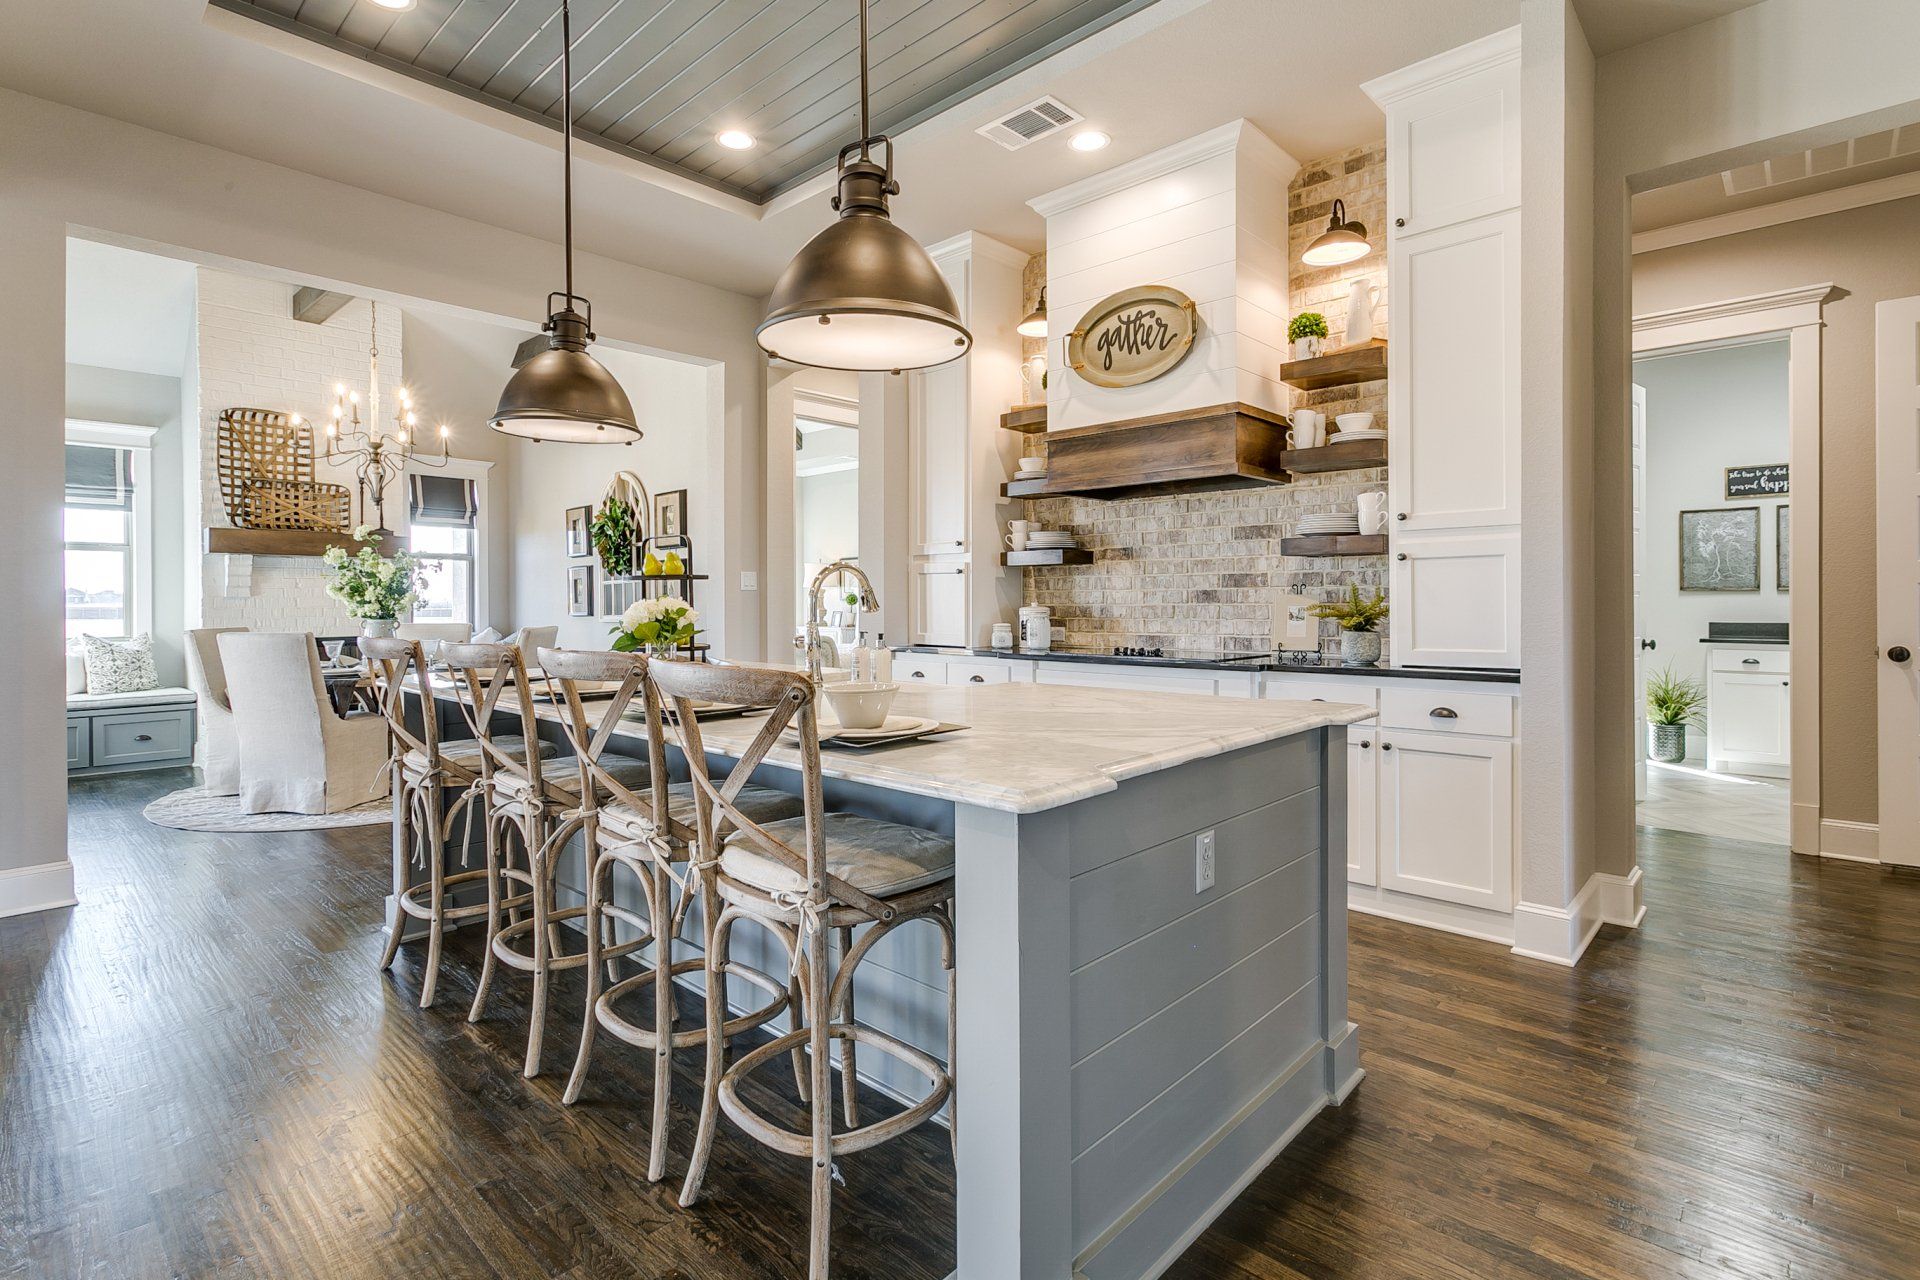 Elegant kitchen area | John Houston Homes | New Homes for Sale in Dallas-Fort Worth, Waco and surrounding areas.